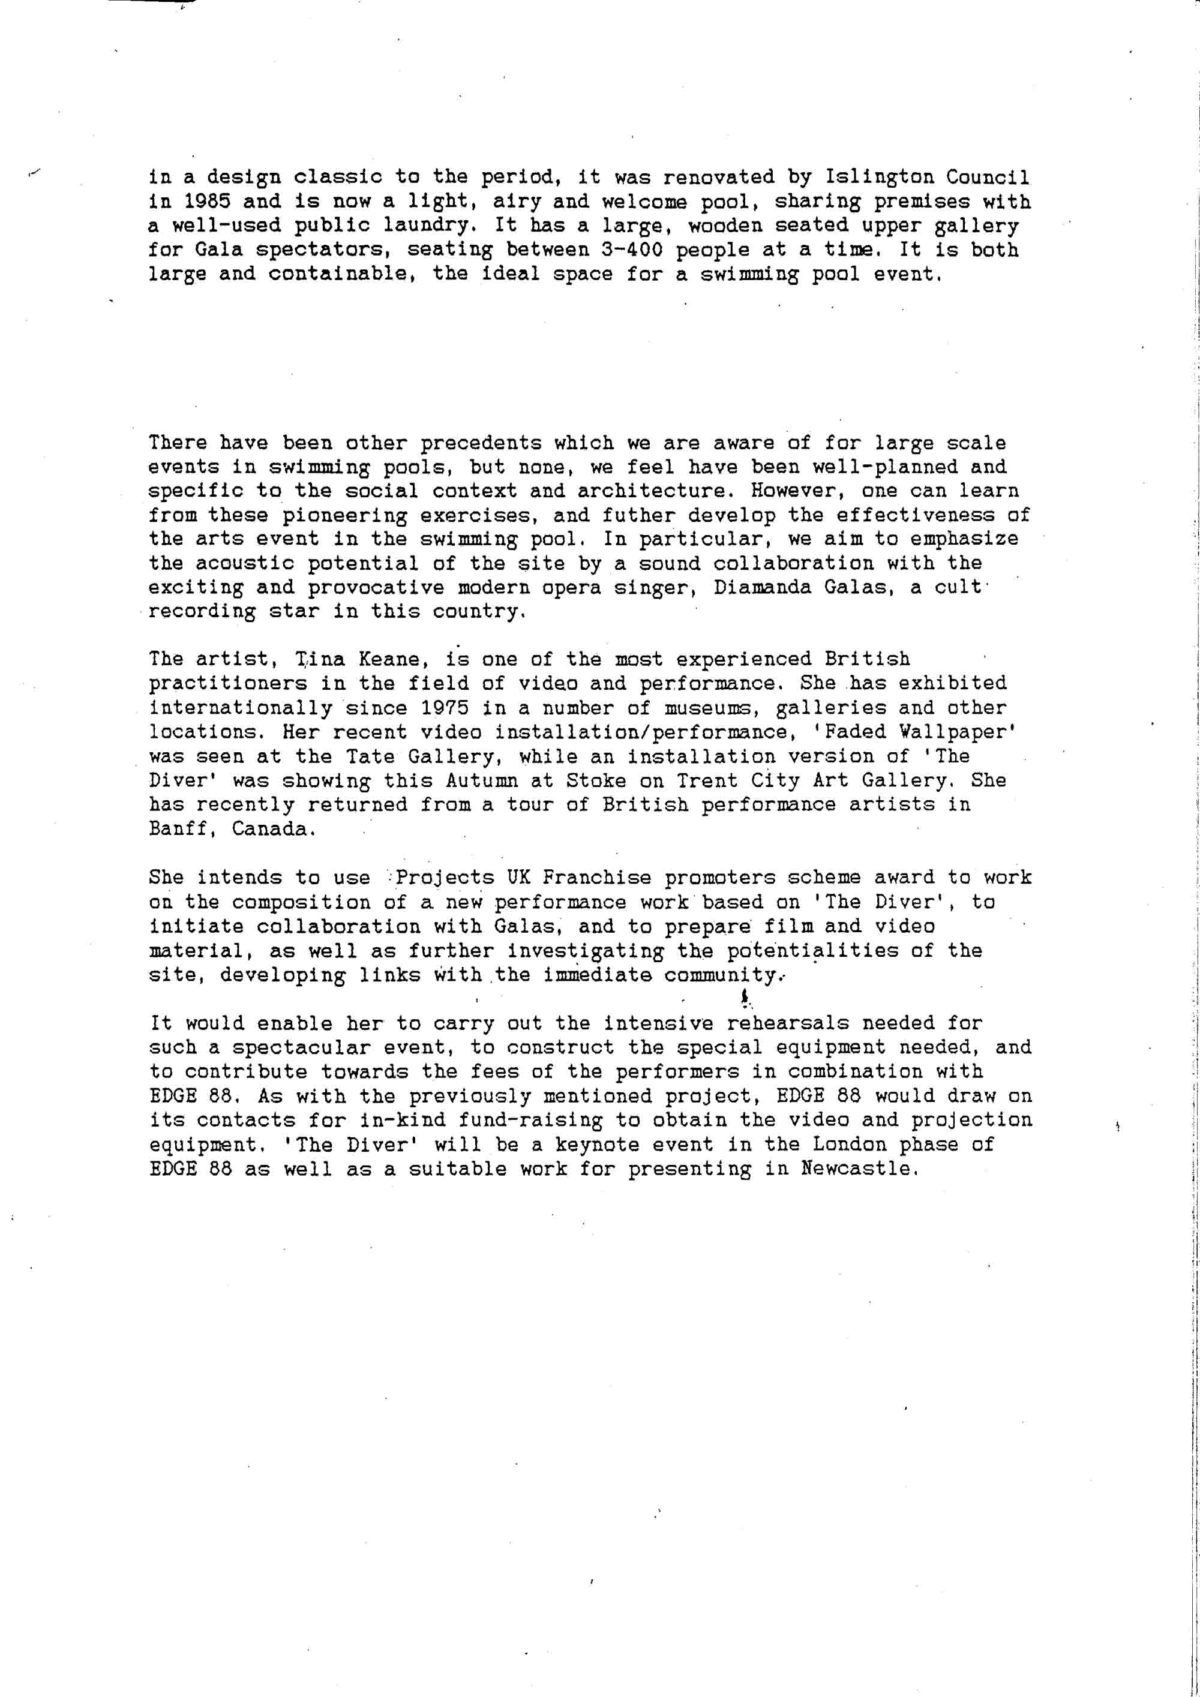 Tina Keane, Artists Statement 'The Diver', 1988 (Page 2 of 2)